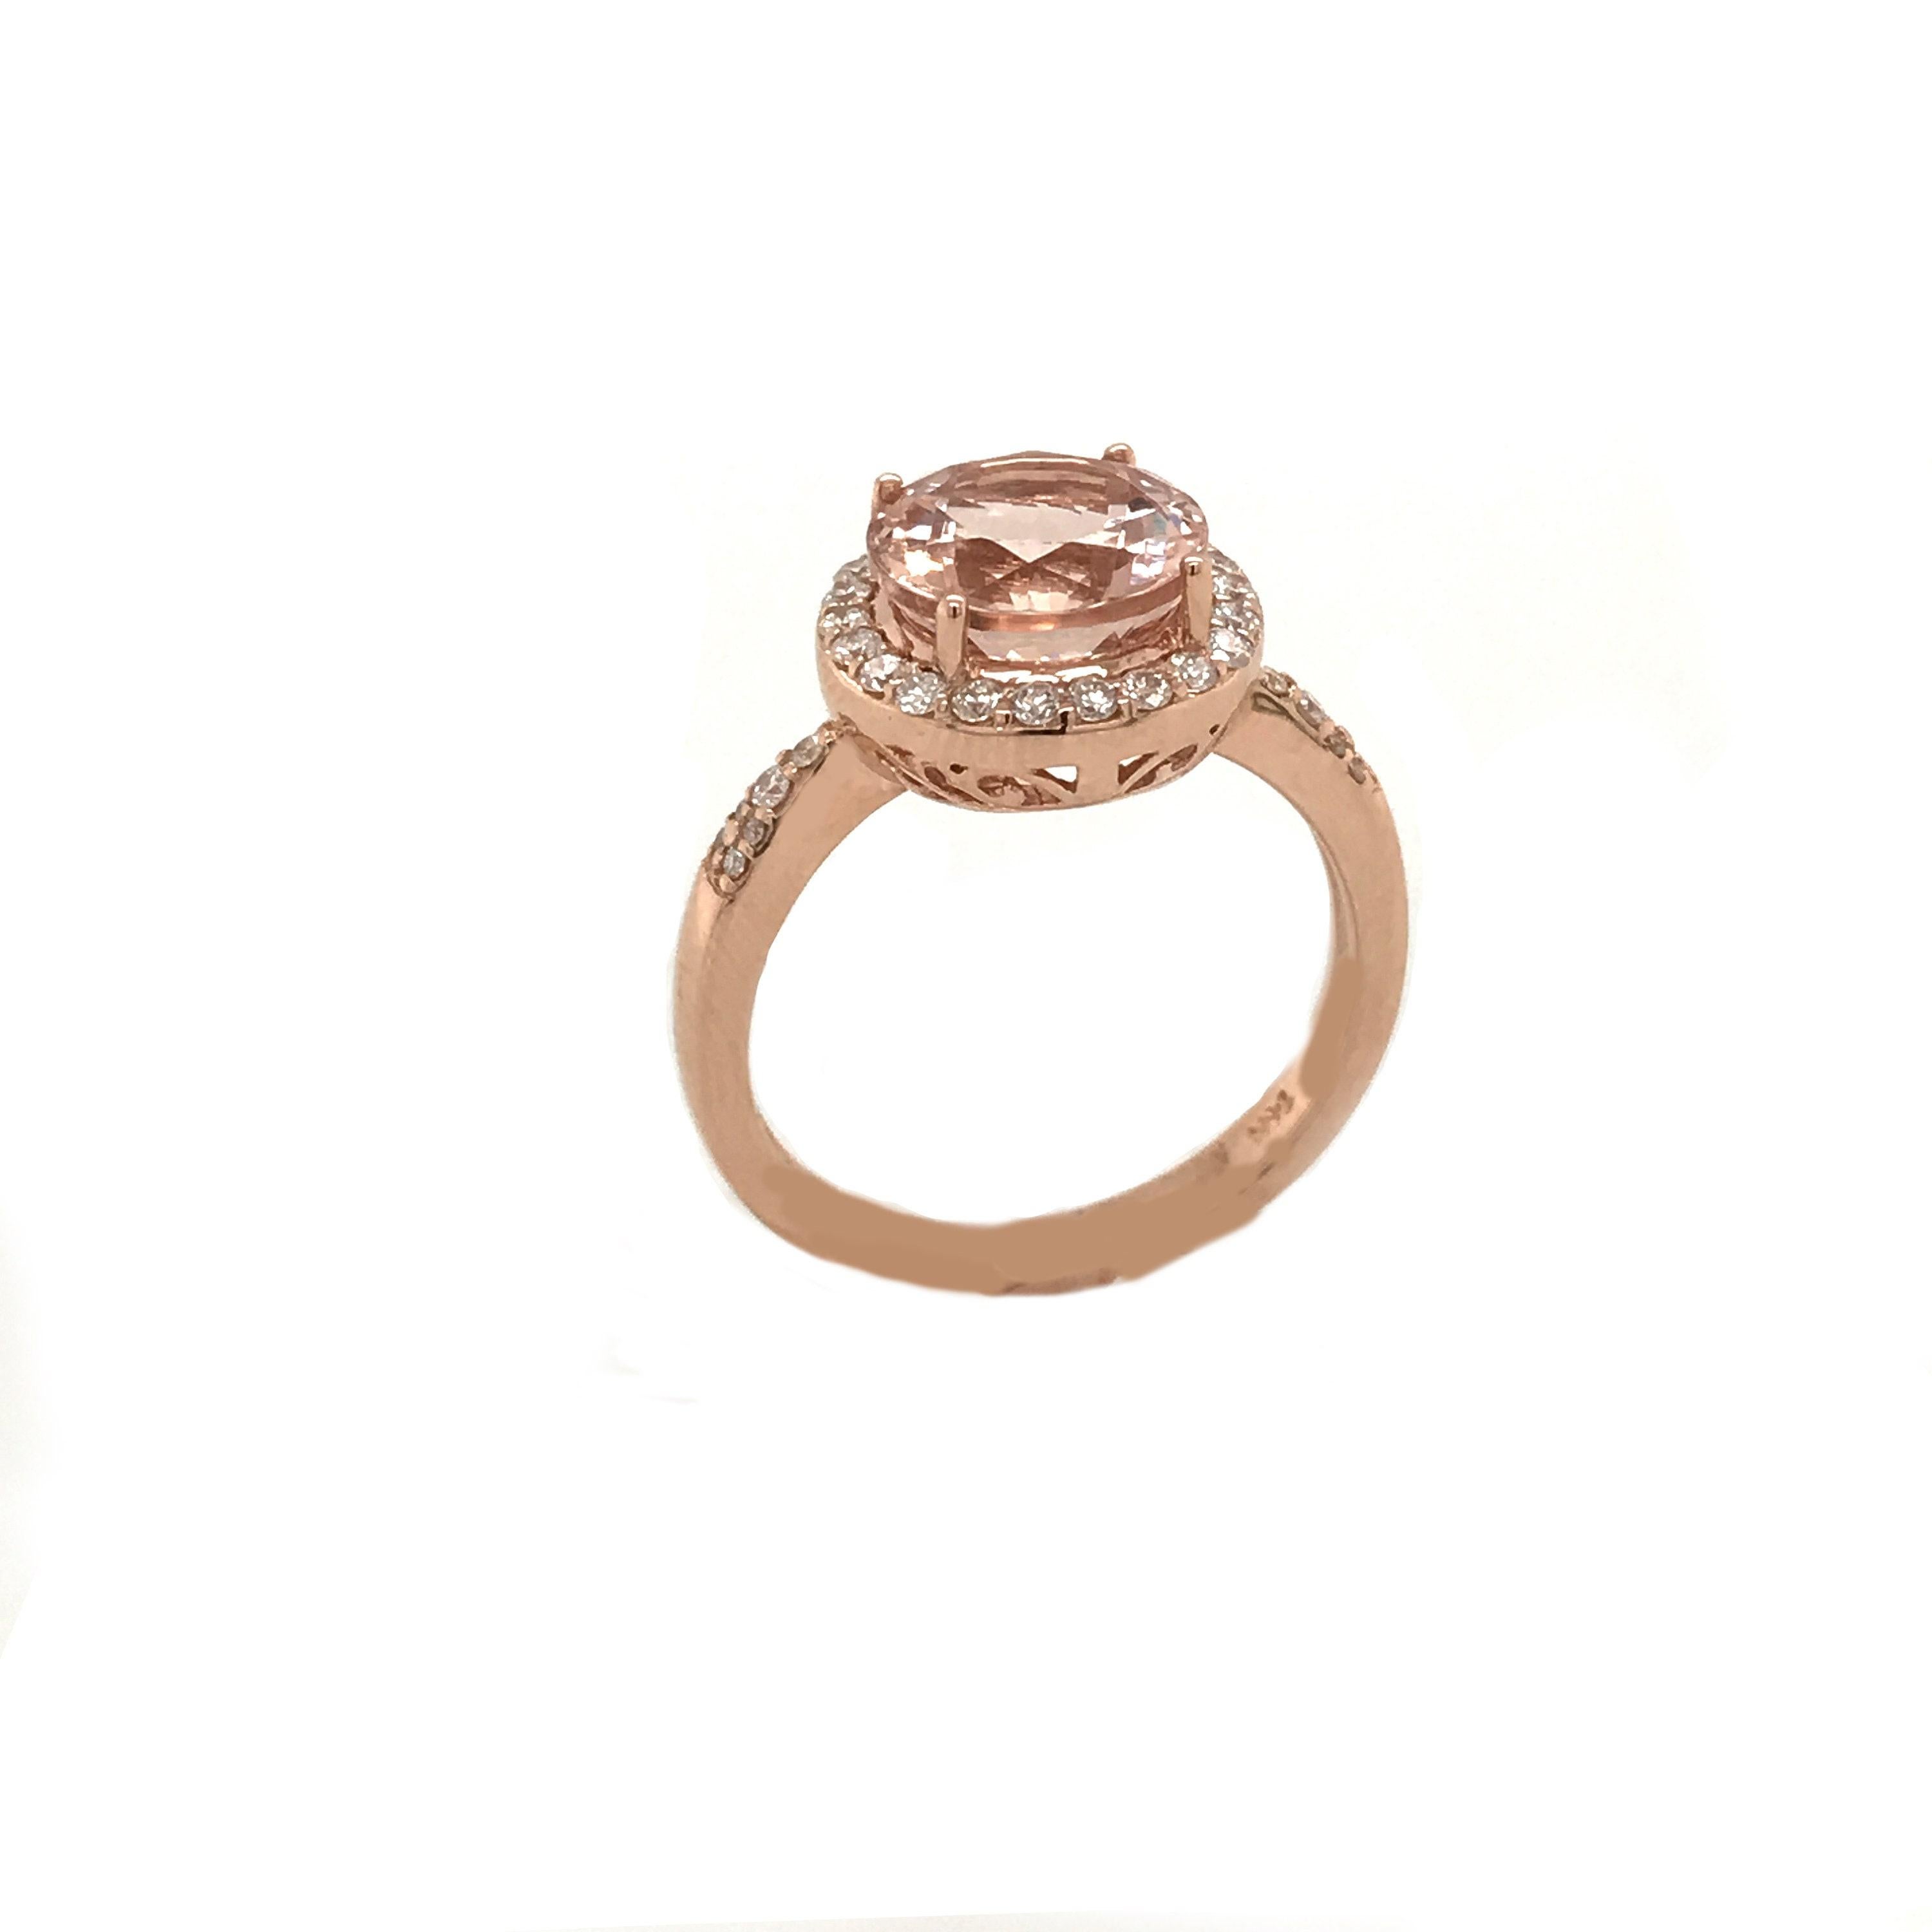 This is a magnificent natural morganite and diamond cocktail ring set in solid 14K rose gold. The natural and large 12X10MM 3.61CT Morganite oval has an excellent peachy pink color (AAA quality gem) and is surrounded by a double diamond halo set on